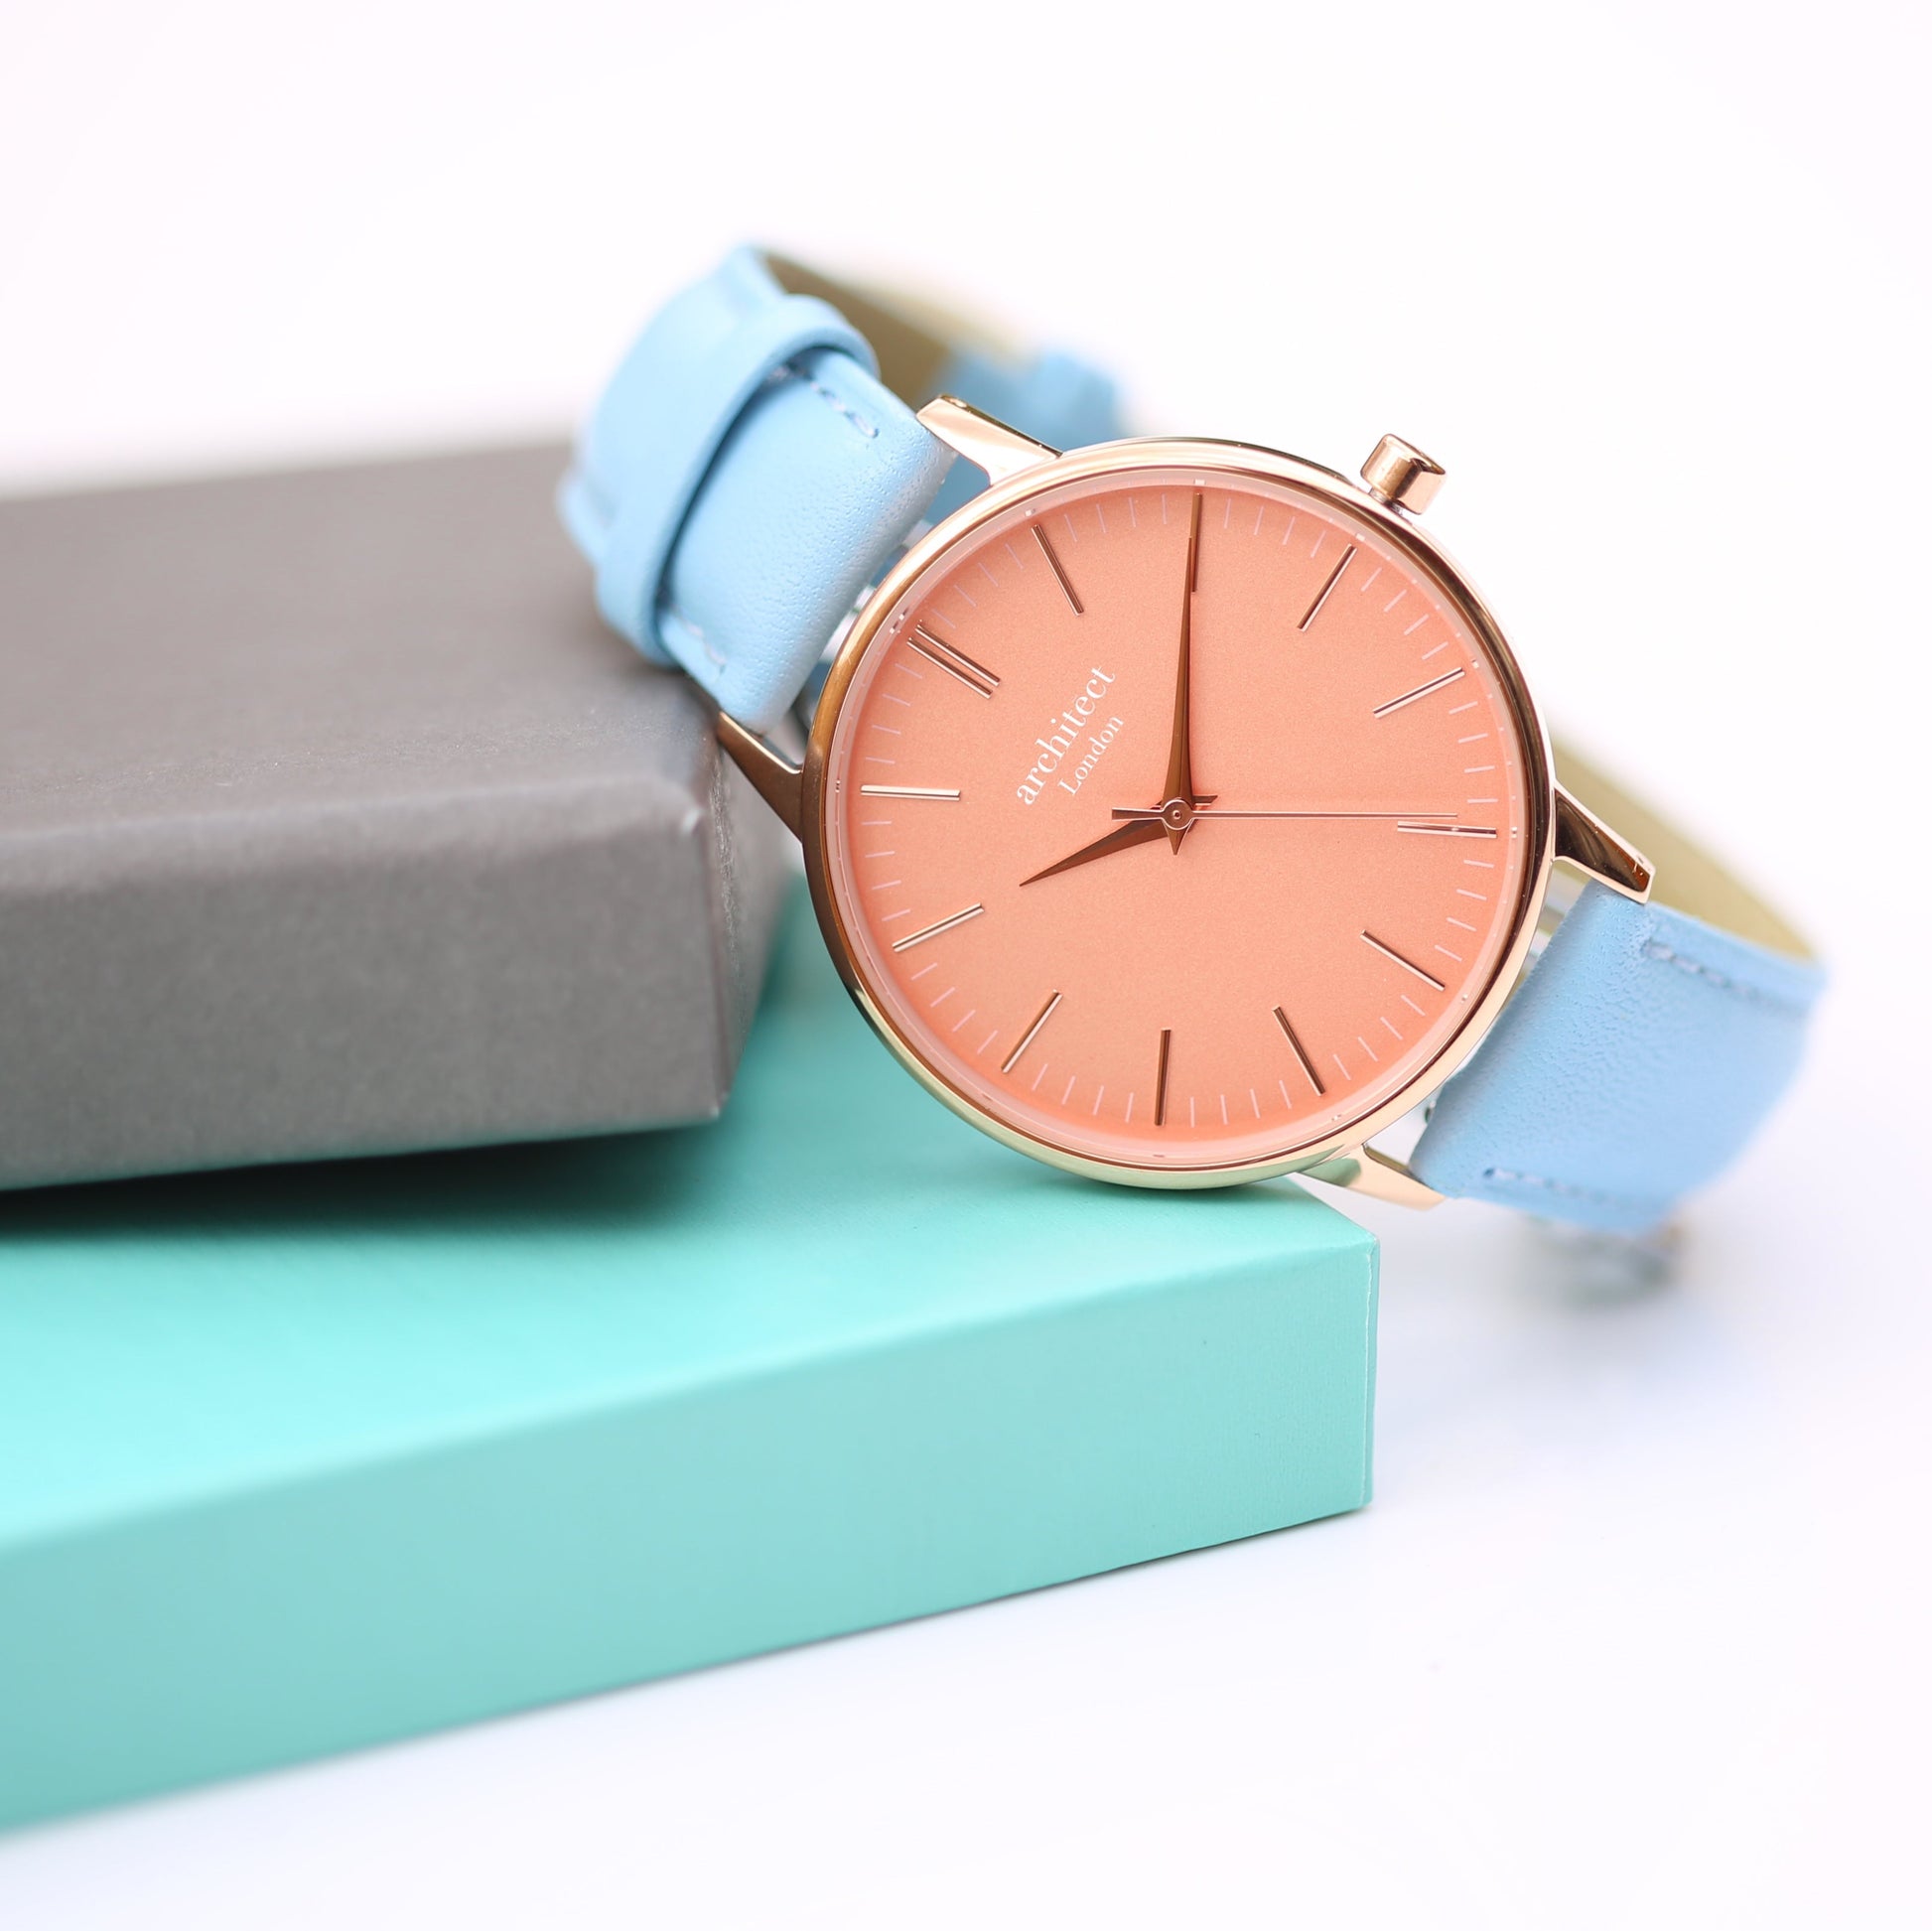 Personalized Ladies' Watches - Handwriting Engraved Watch in Light Blue 